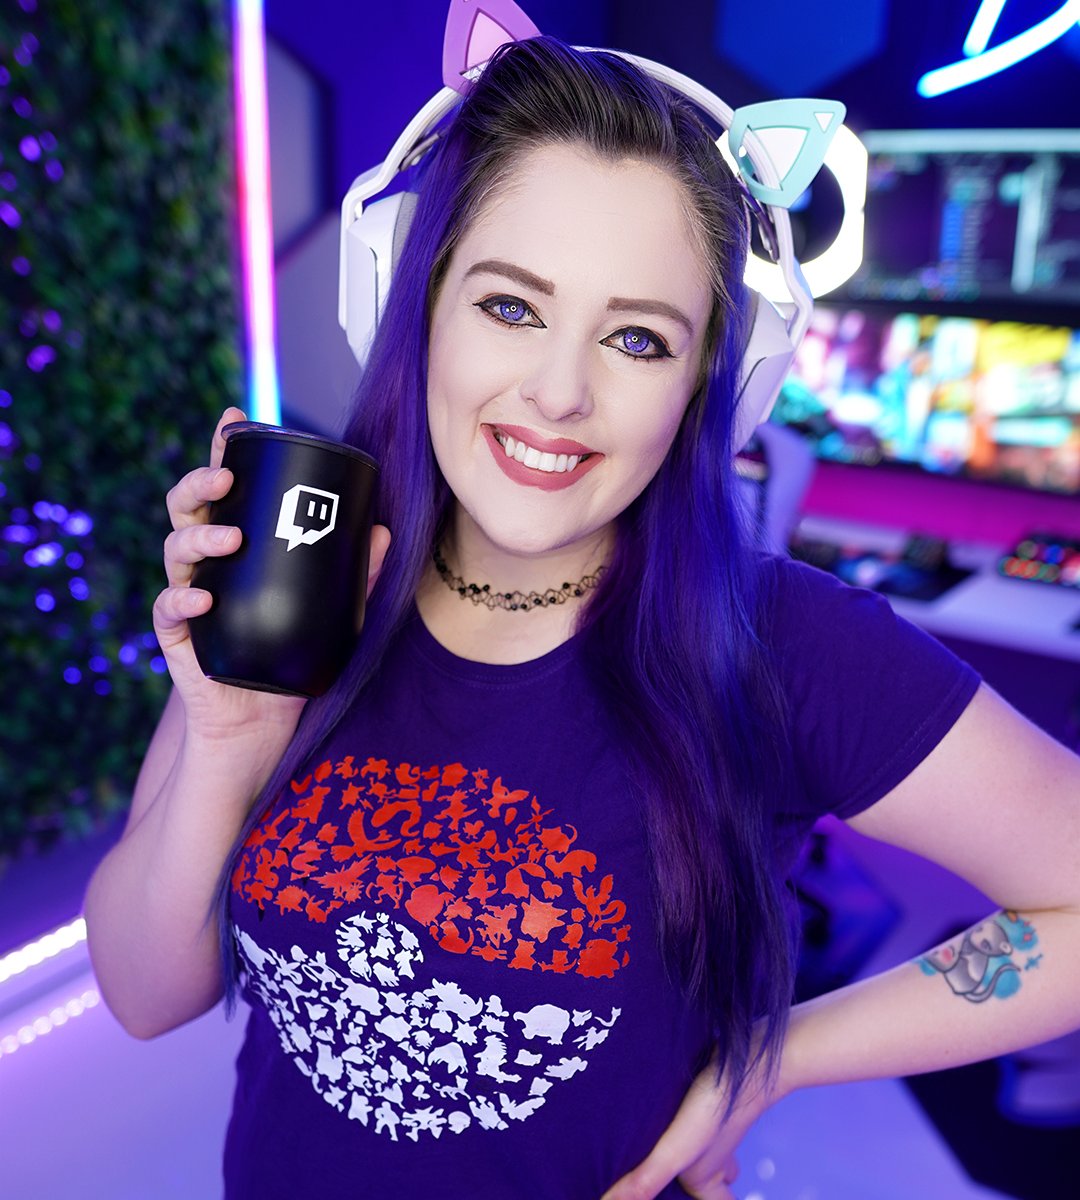 Happy Friday folks ☕️ So glad its Friday, grab some coffee and lets head live with a showcasing of an awesome brand new party action game, @TurboGolfRacing! Tune in for games and key giveaways ⛳️🏎️ twitch.tv/blueandqueenie #ad